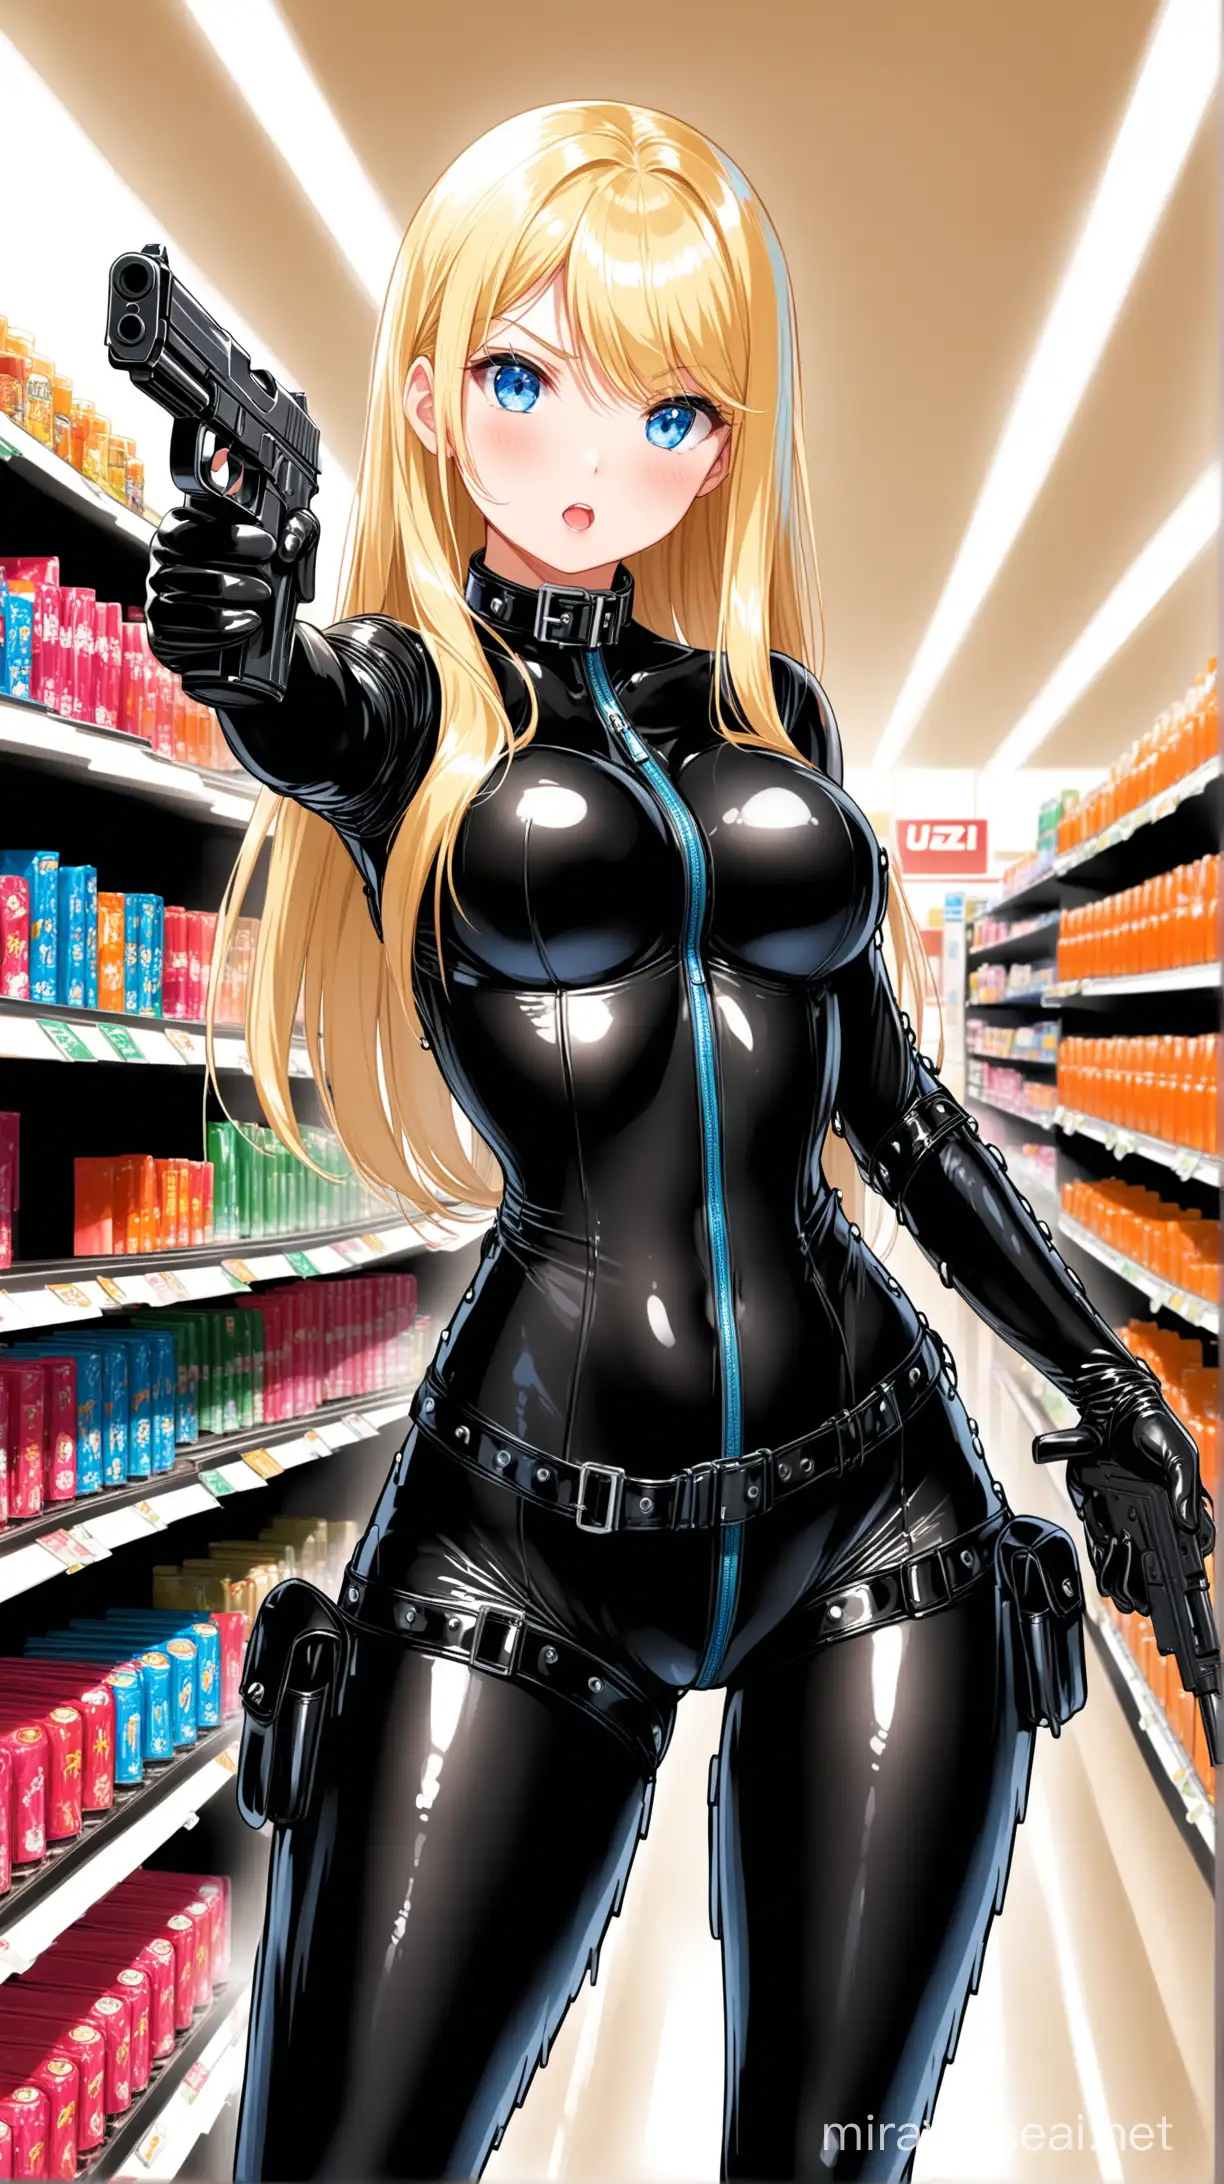  A pretty blond hair woman, shoulder length hair, blue eyes. holding uzi 9mm both hands, aiming., standing upright. action pose. wearing a glossy black catsuit. neck collar, fetish corset. long gloves, arm straps. many belts. thigh straps. heavy rubber outfit. fetish wear. solo.  inside a convenience store